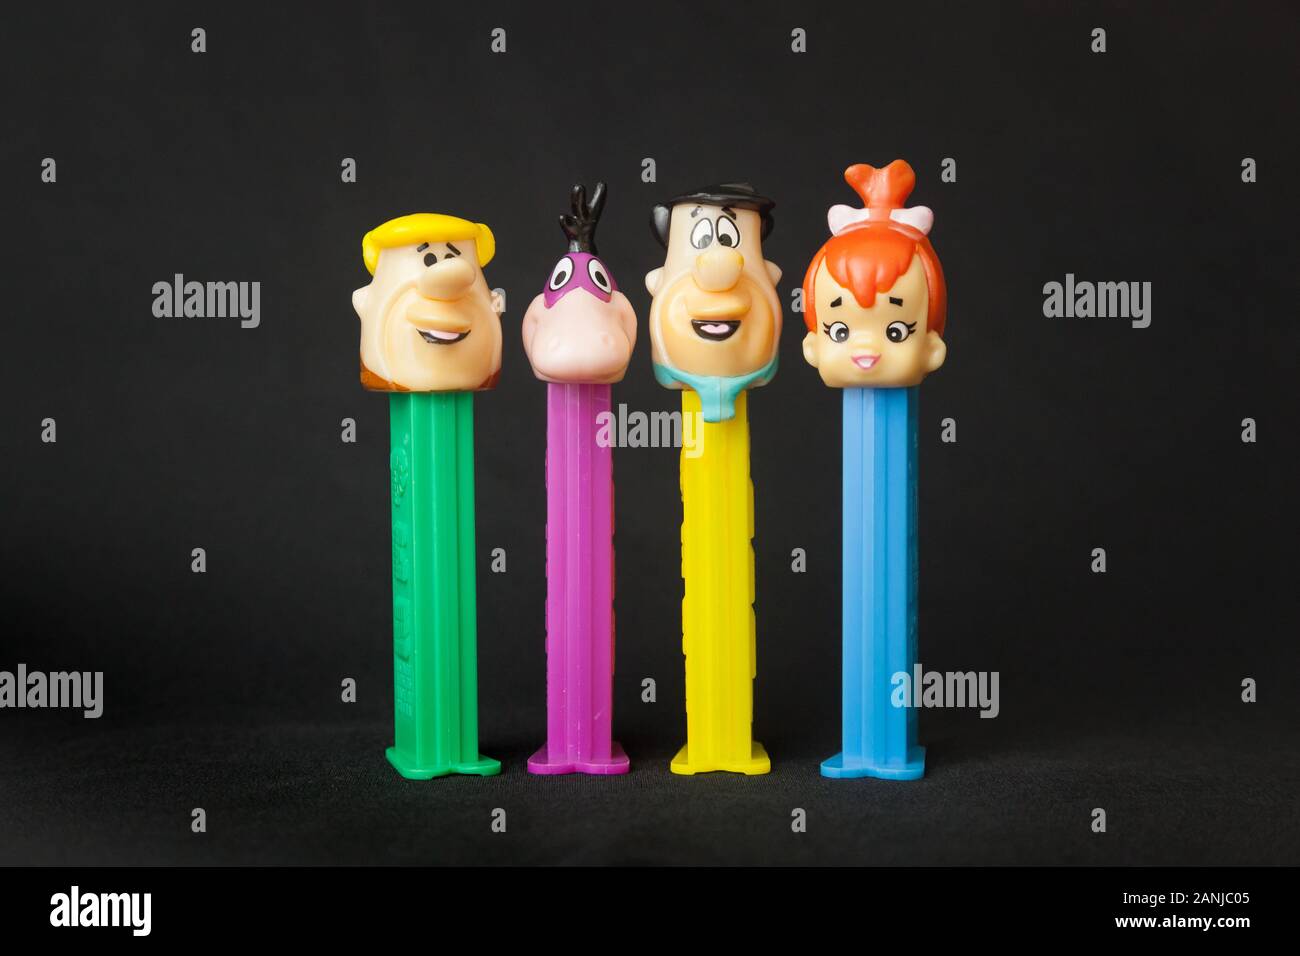 WOODBRIDGE, NEW JERSEY / UNITED STATES - January 16, 2020: Four Flintstones Pez dispensers are lined up on a black background Stock Photo